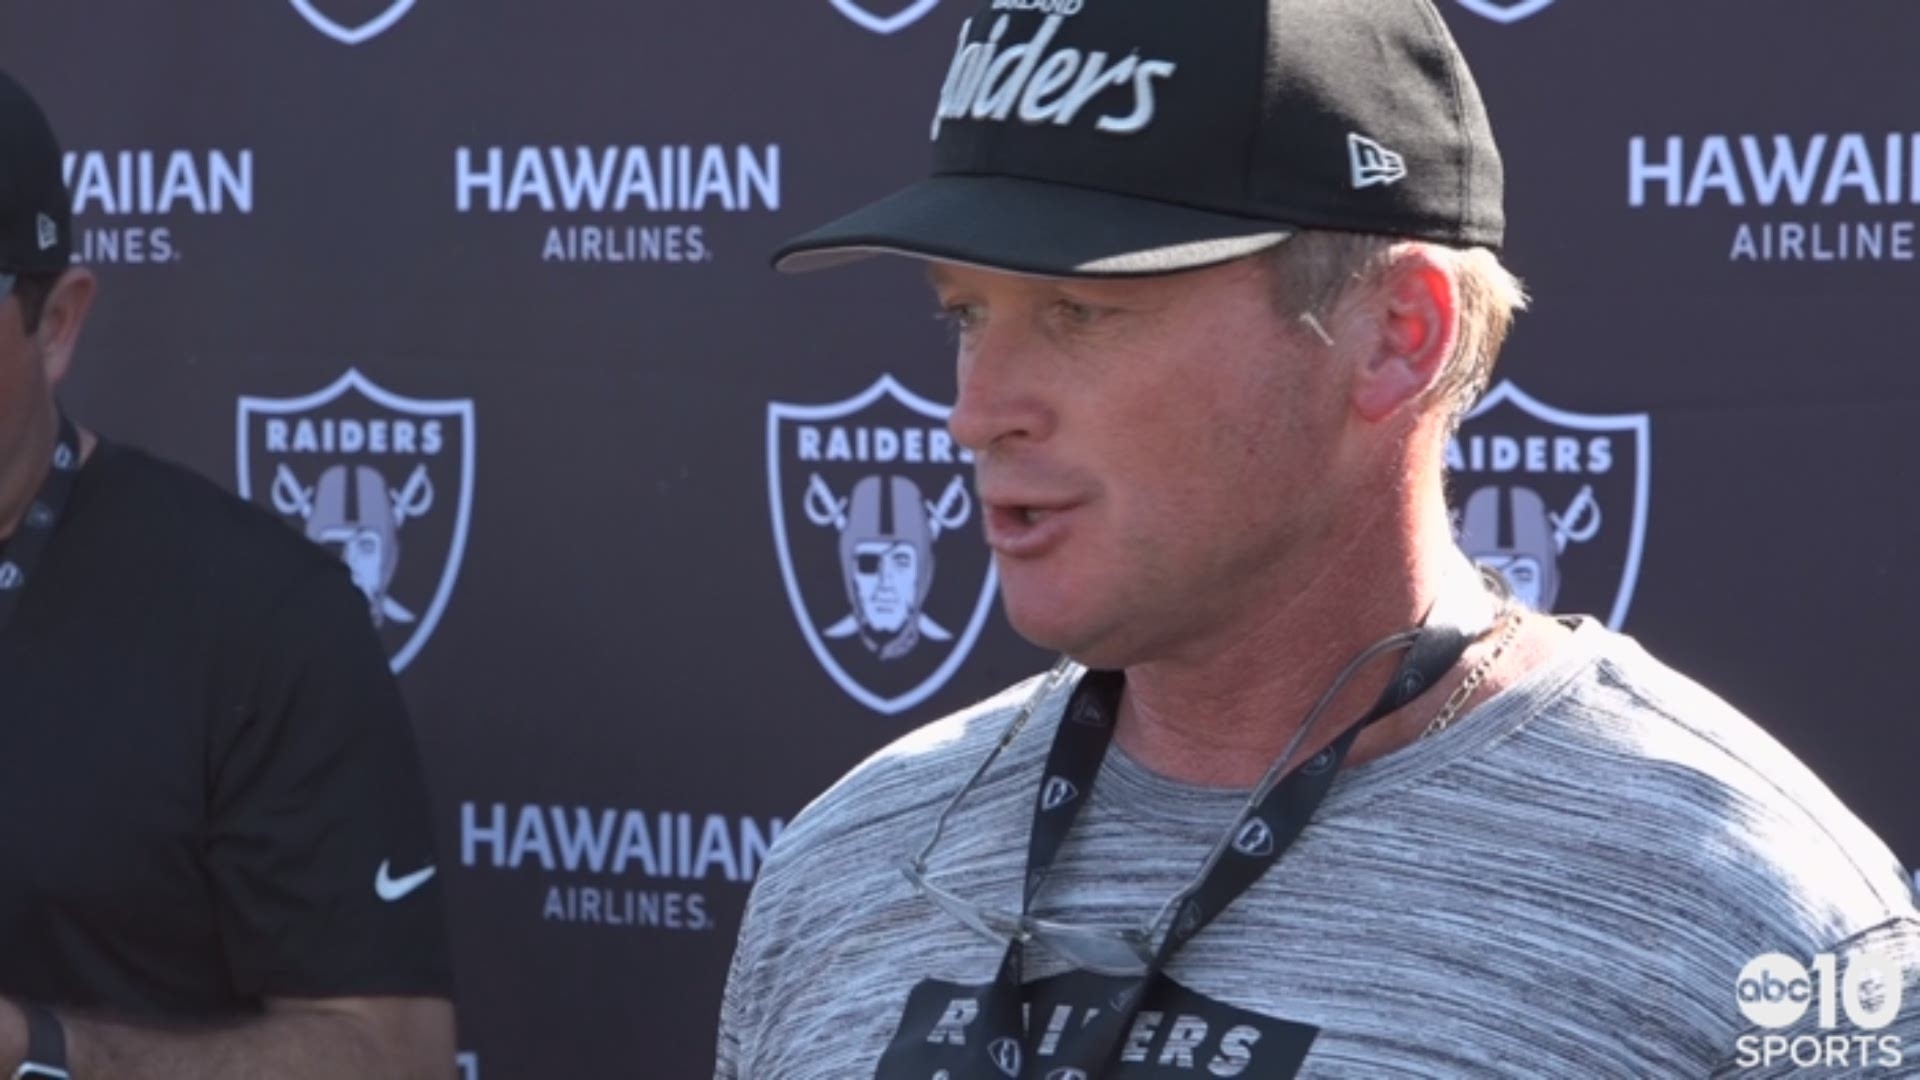 Oakland Raiders head coach Jon Gruden discusses Monday's training camp, the team likely moving on from holdout Vadal Alexander, impressions of rookie Kolton Miller and being back in Napa in his second coaching stint with the silver and black.